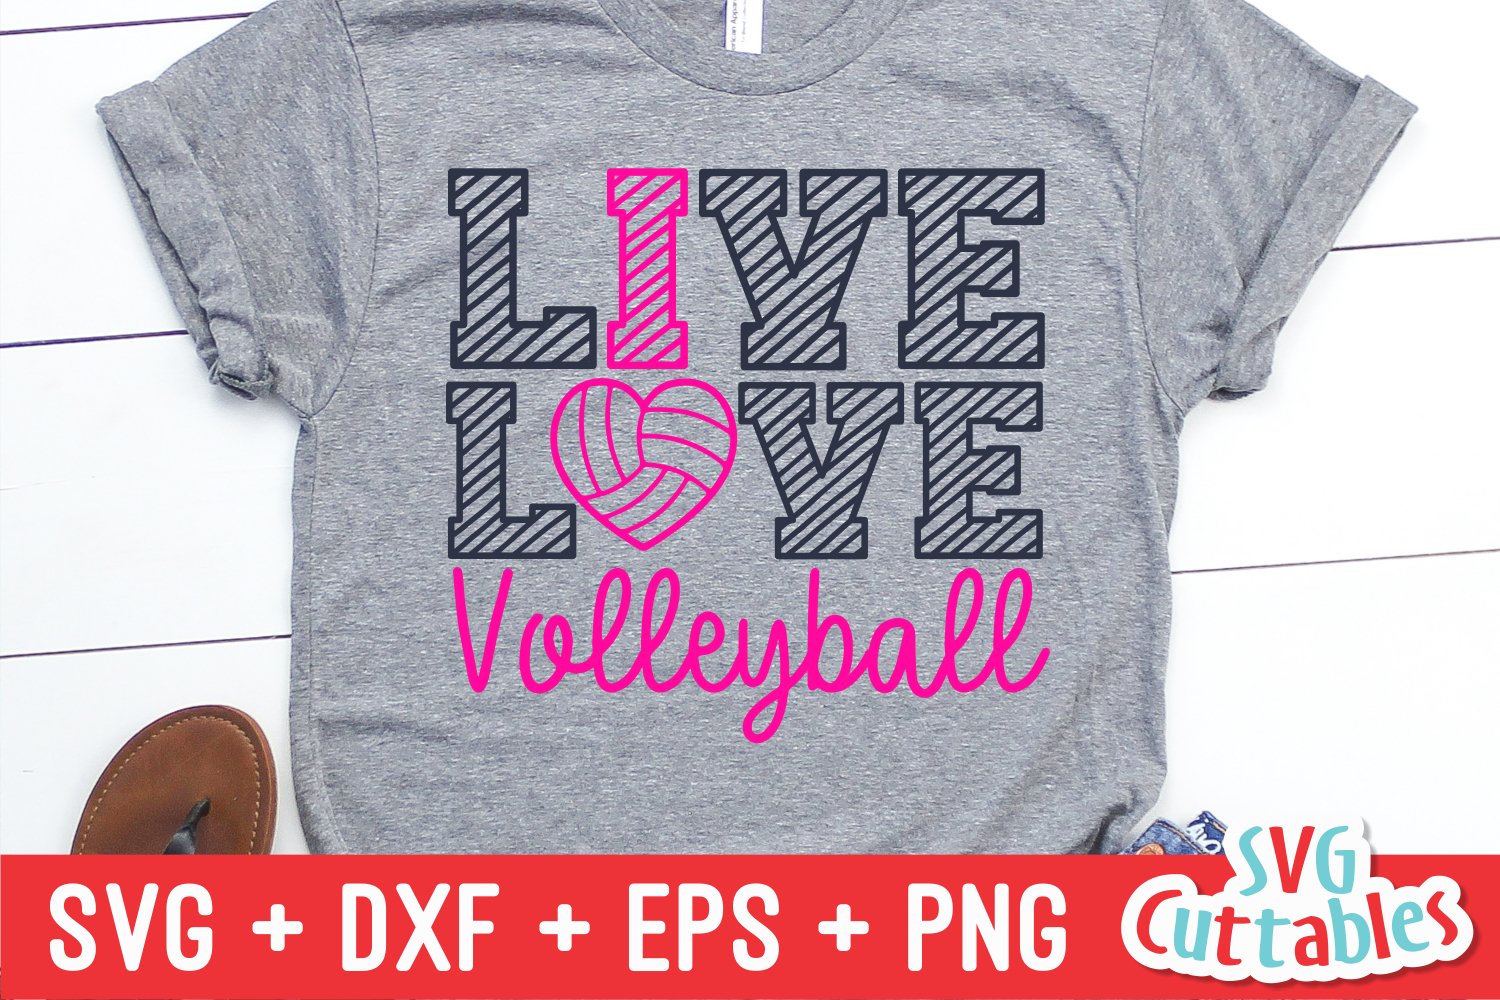 Live Love Volleyball on t-shirt design.